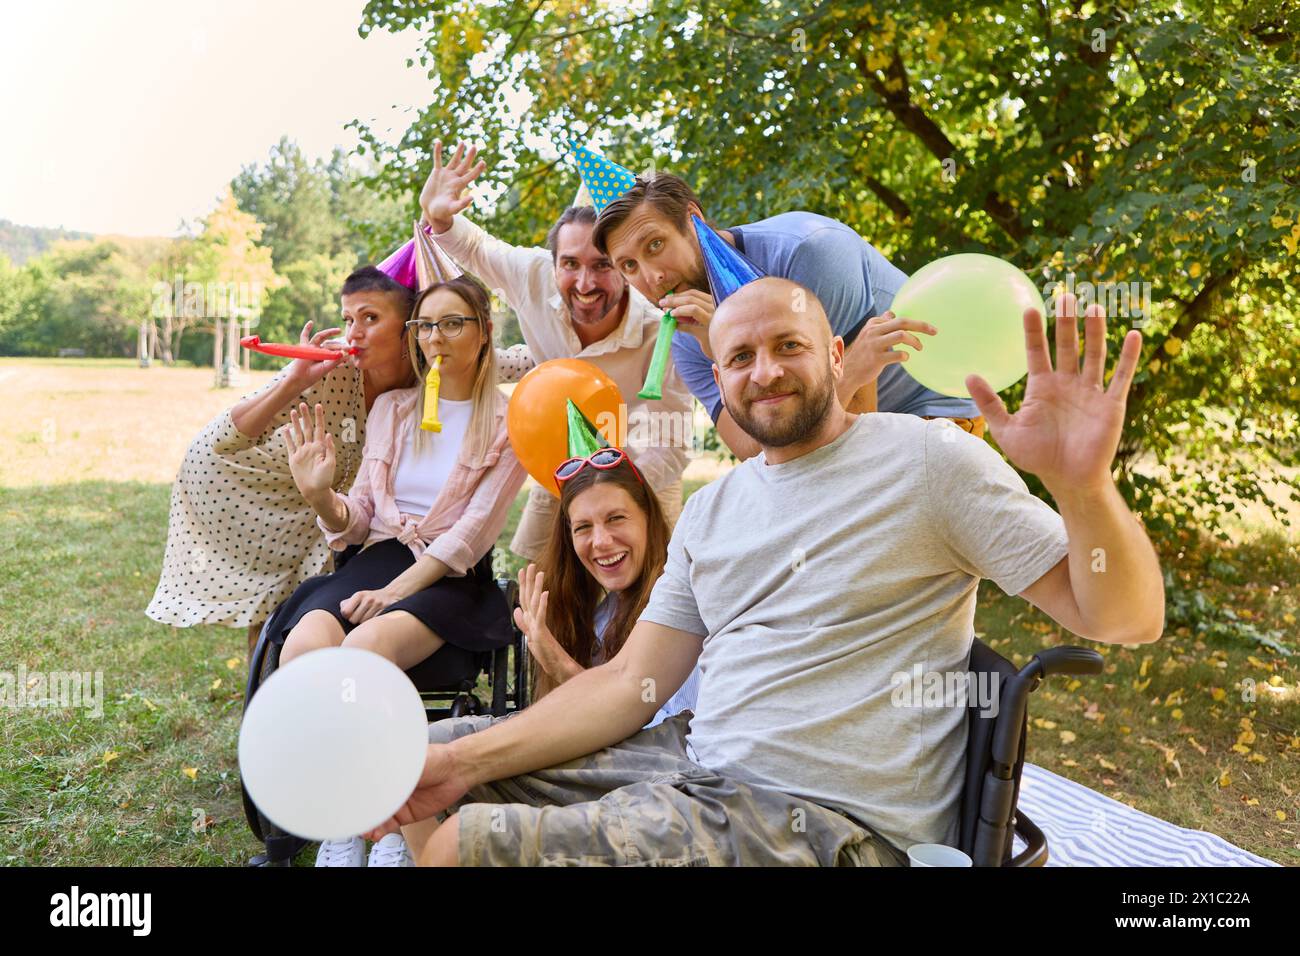 Group of happy friends with party accessories enjoying an inclusive outdoor celebration, with a woman in a wheelchair at the forefront Stock Photo